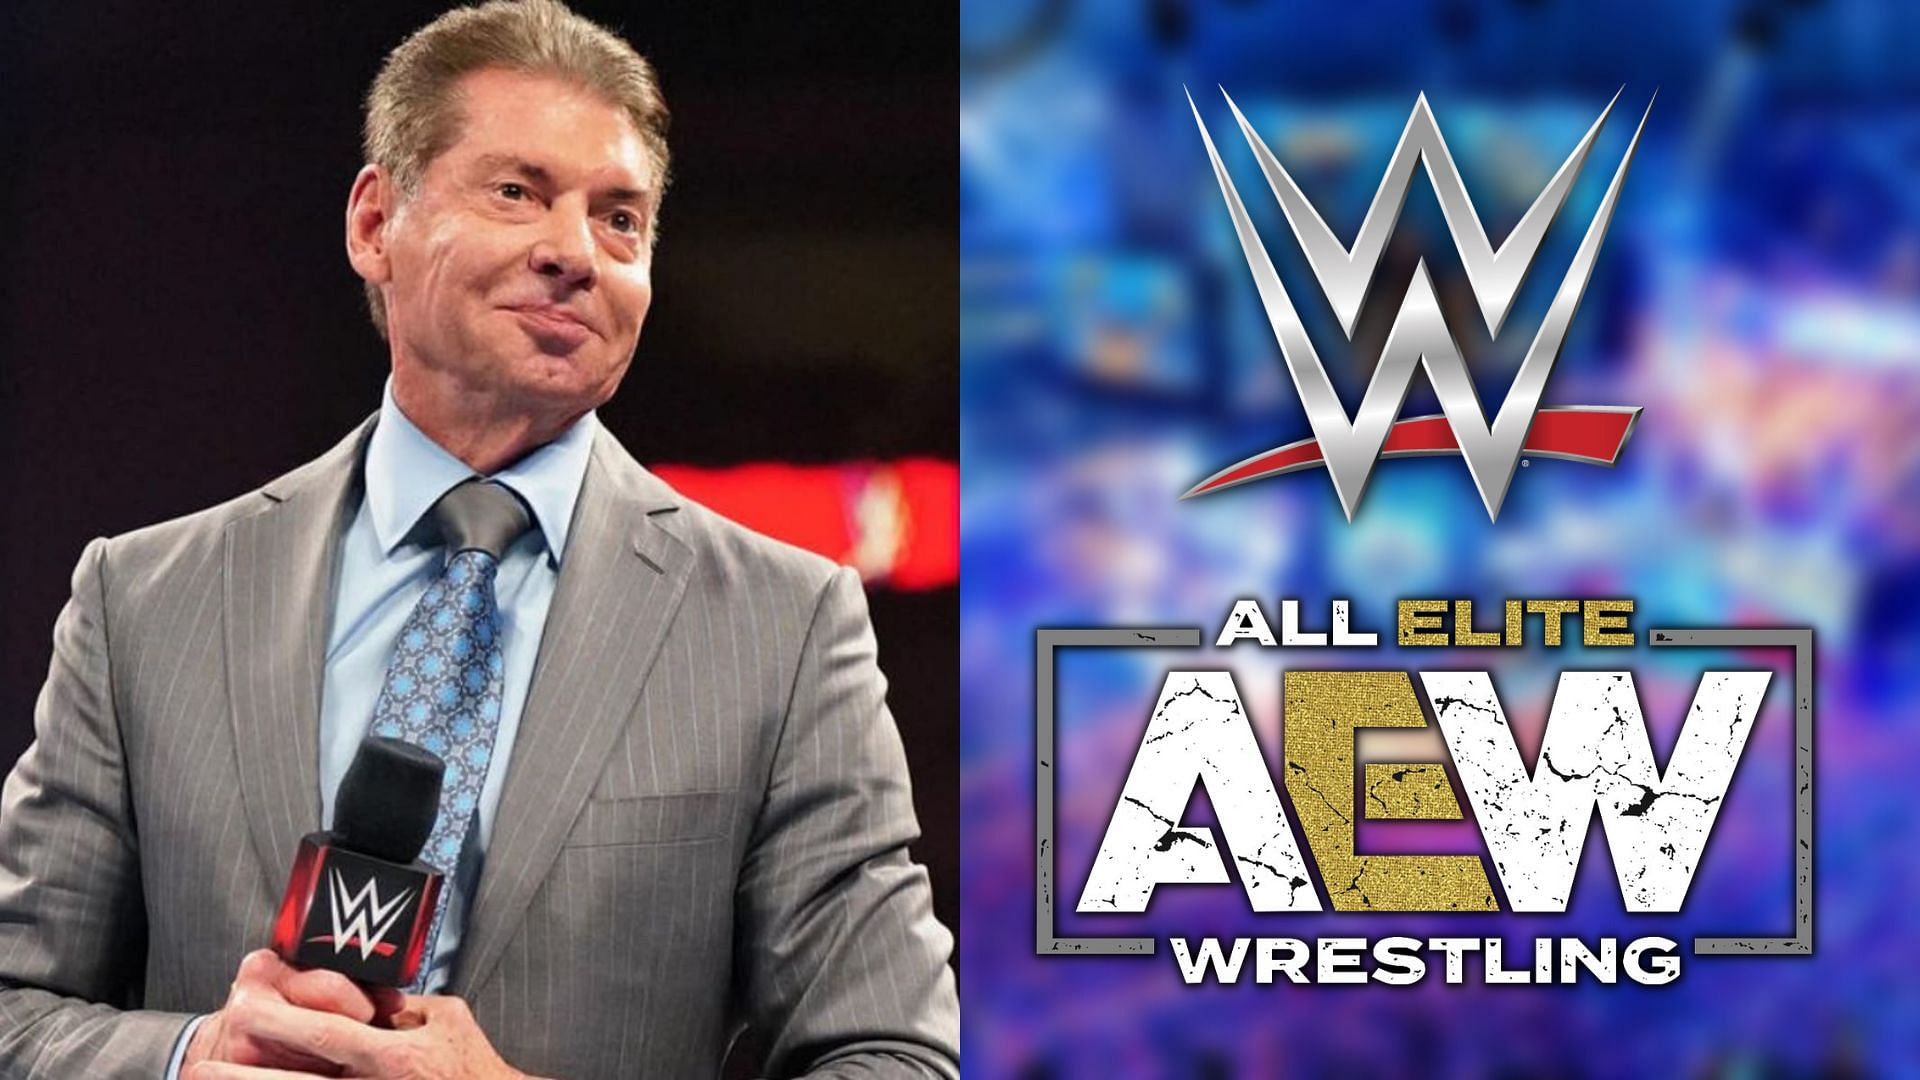 Vince McMahon had been heavily involved in last week